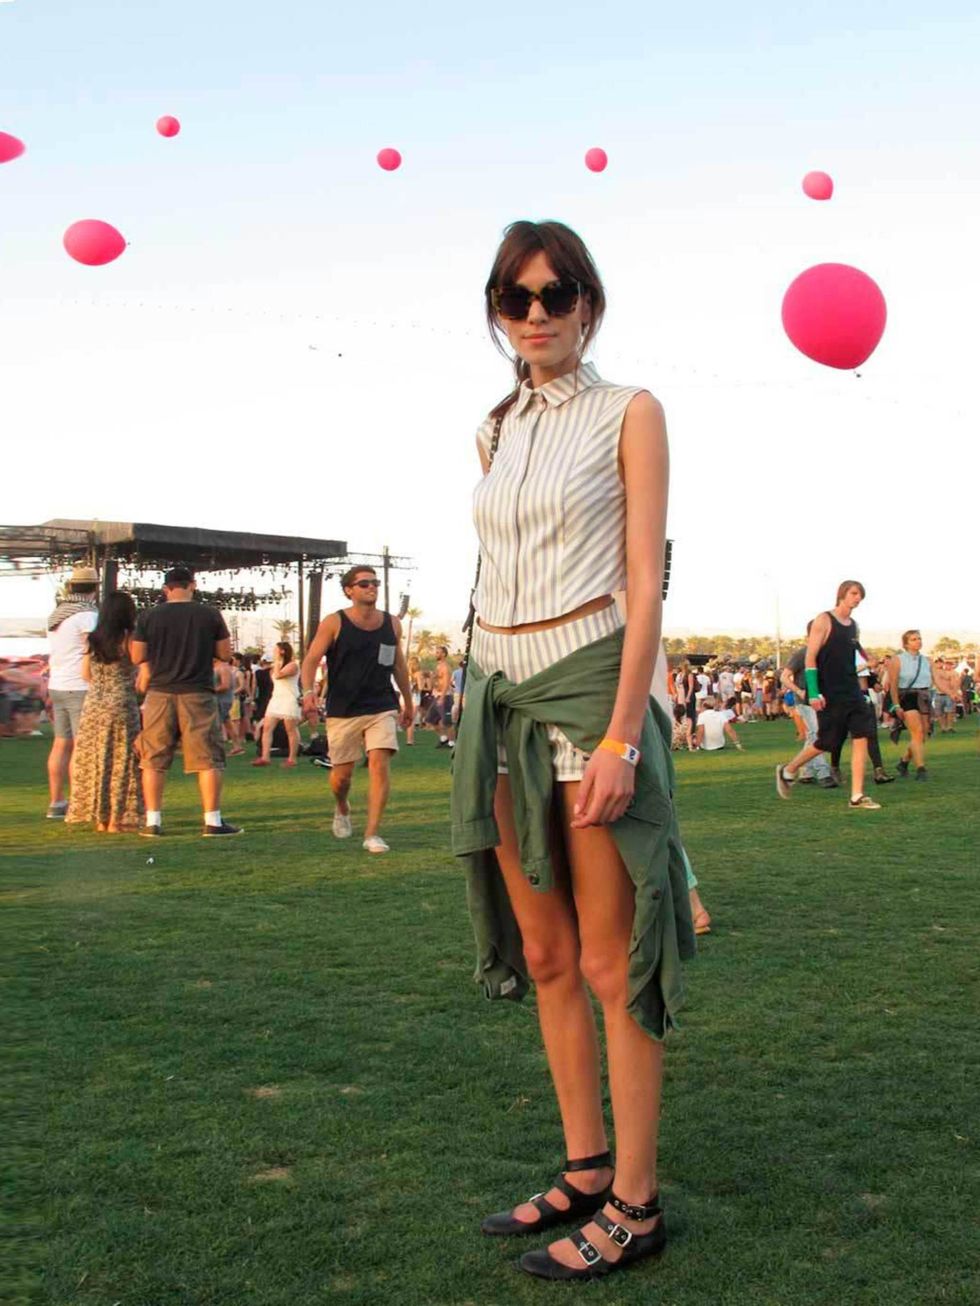 <p><a href="http://www.elleuk.com/star-style/celebrity-style-files/alexa-chung-s-style-file">Alexa Chung</a> wears a Philosophy dress and Karen Walker sunglasses to Coachella 2013.</p>